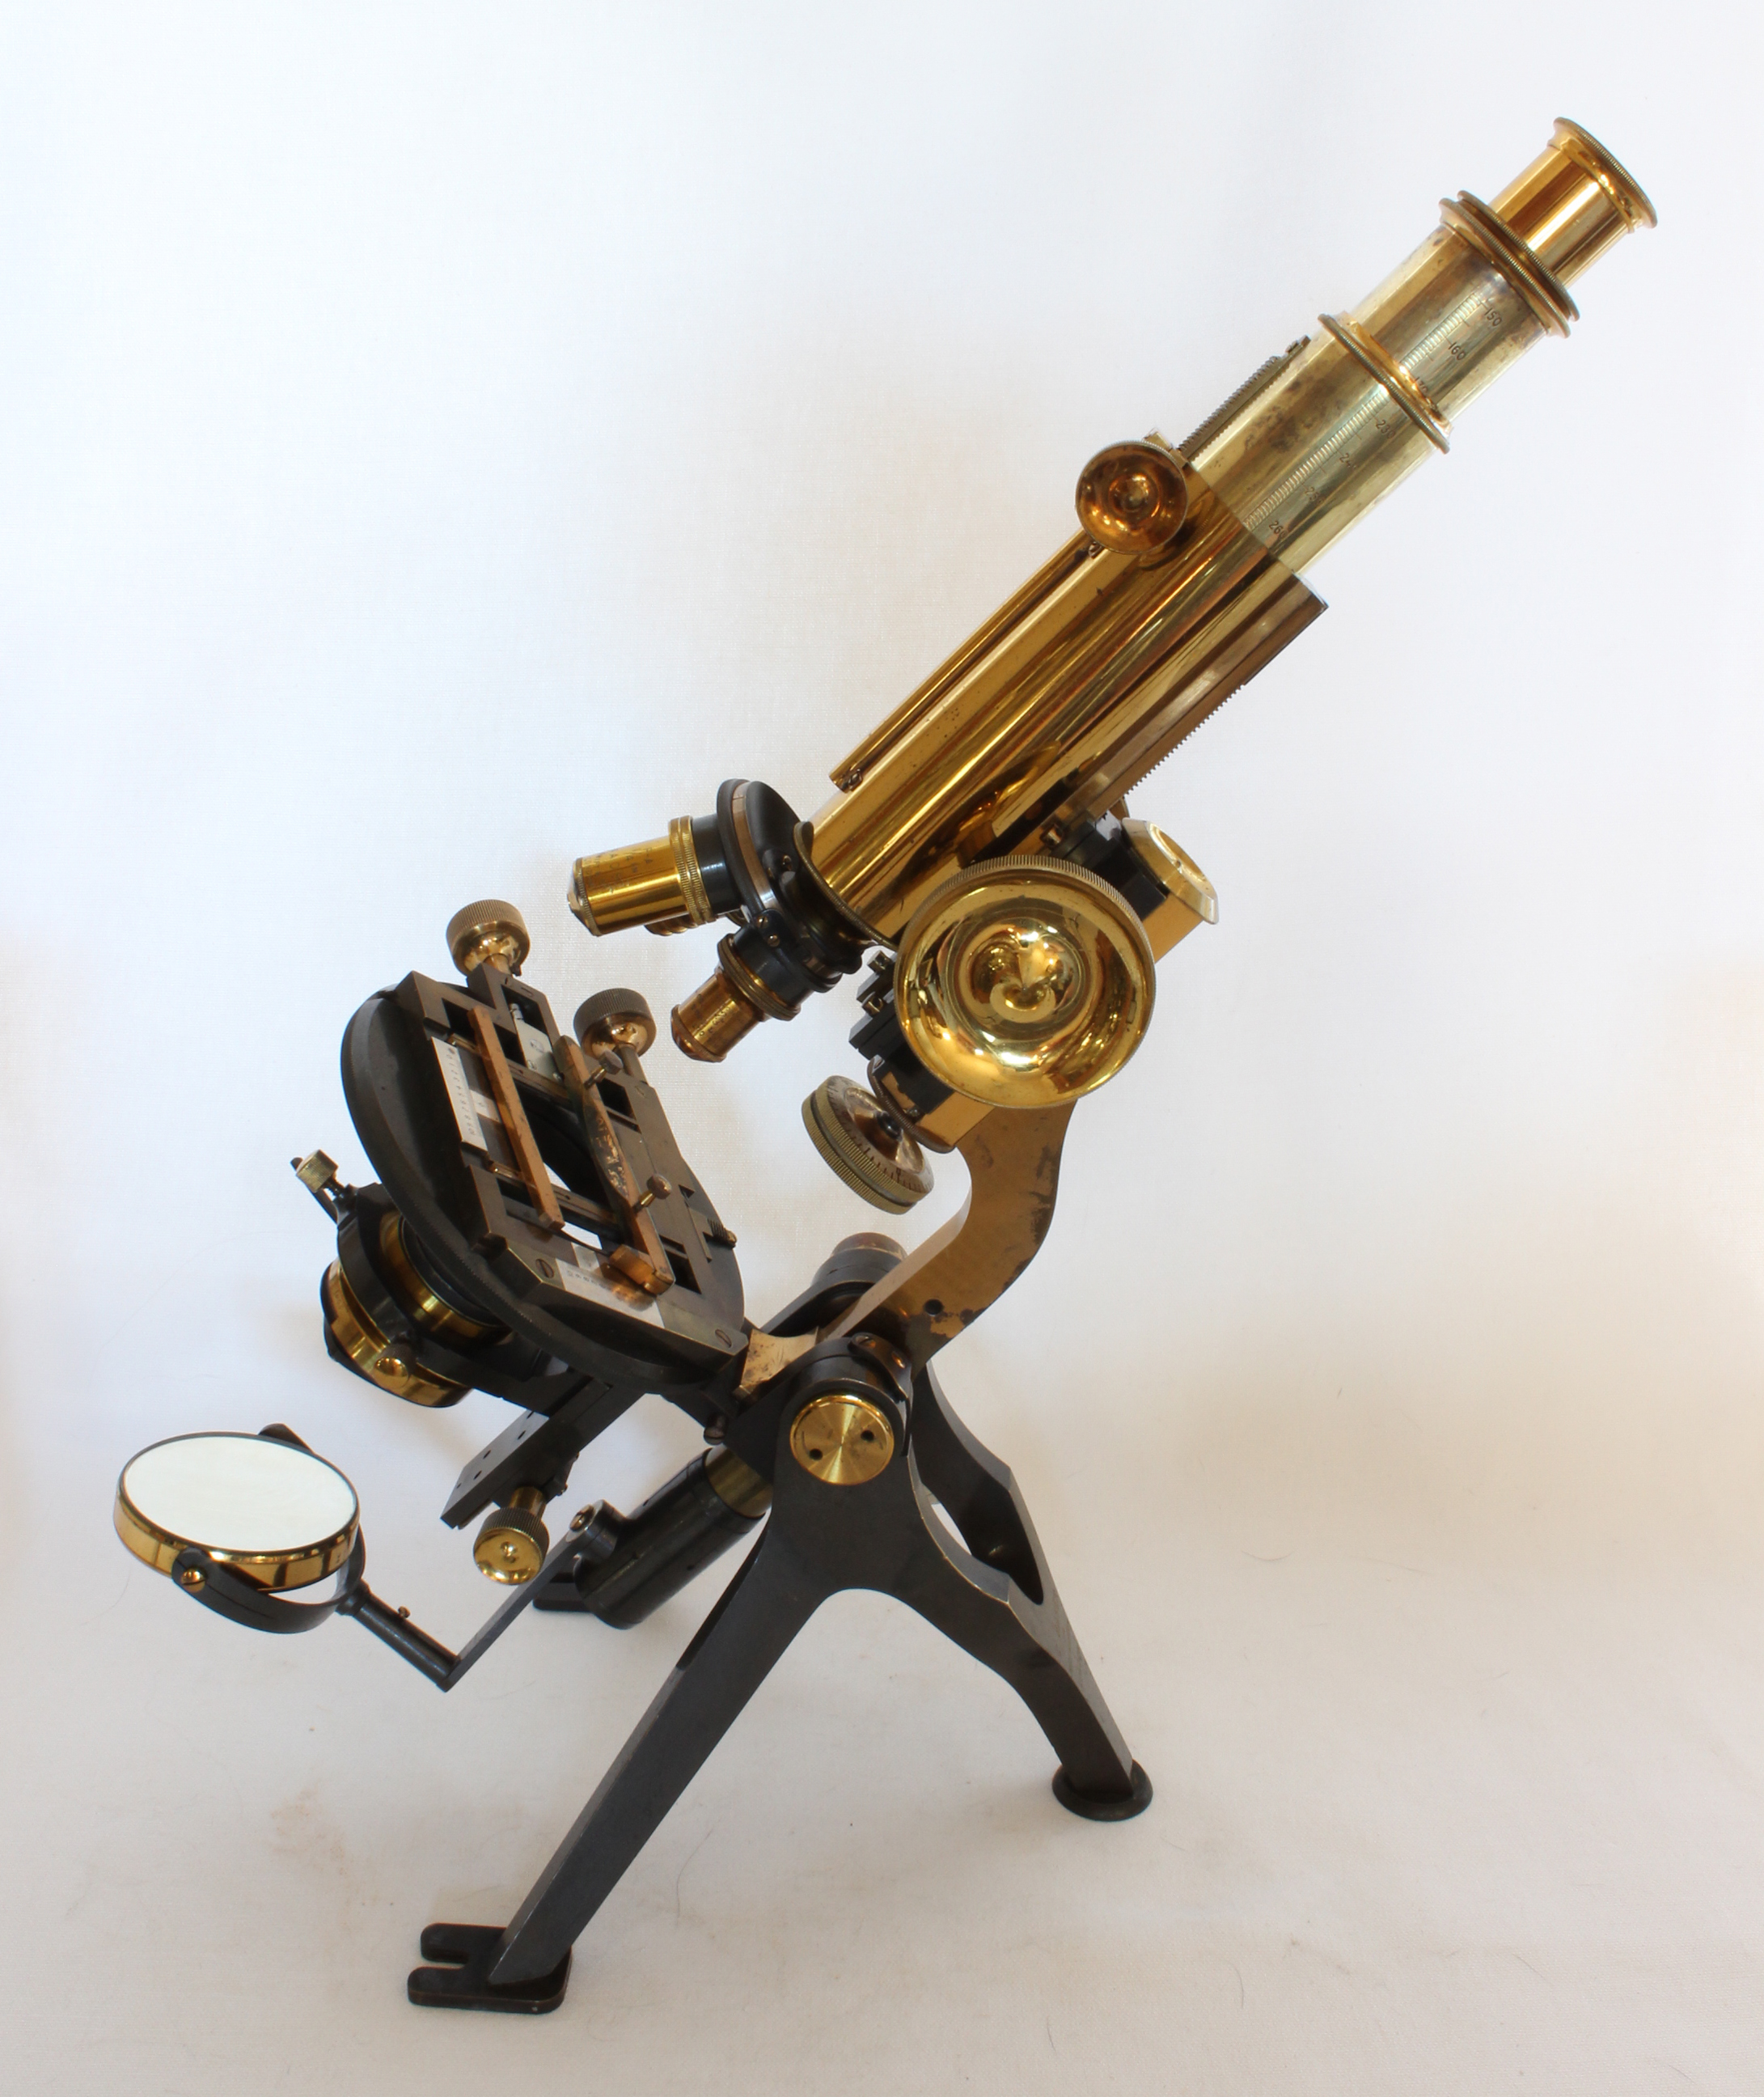 Nelson-Curties Microscope right side